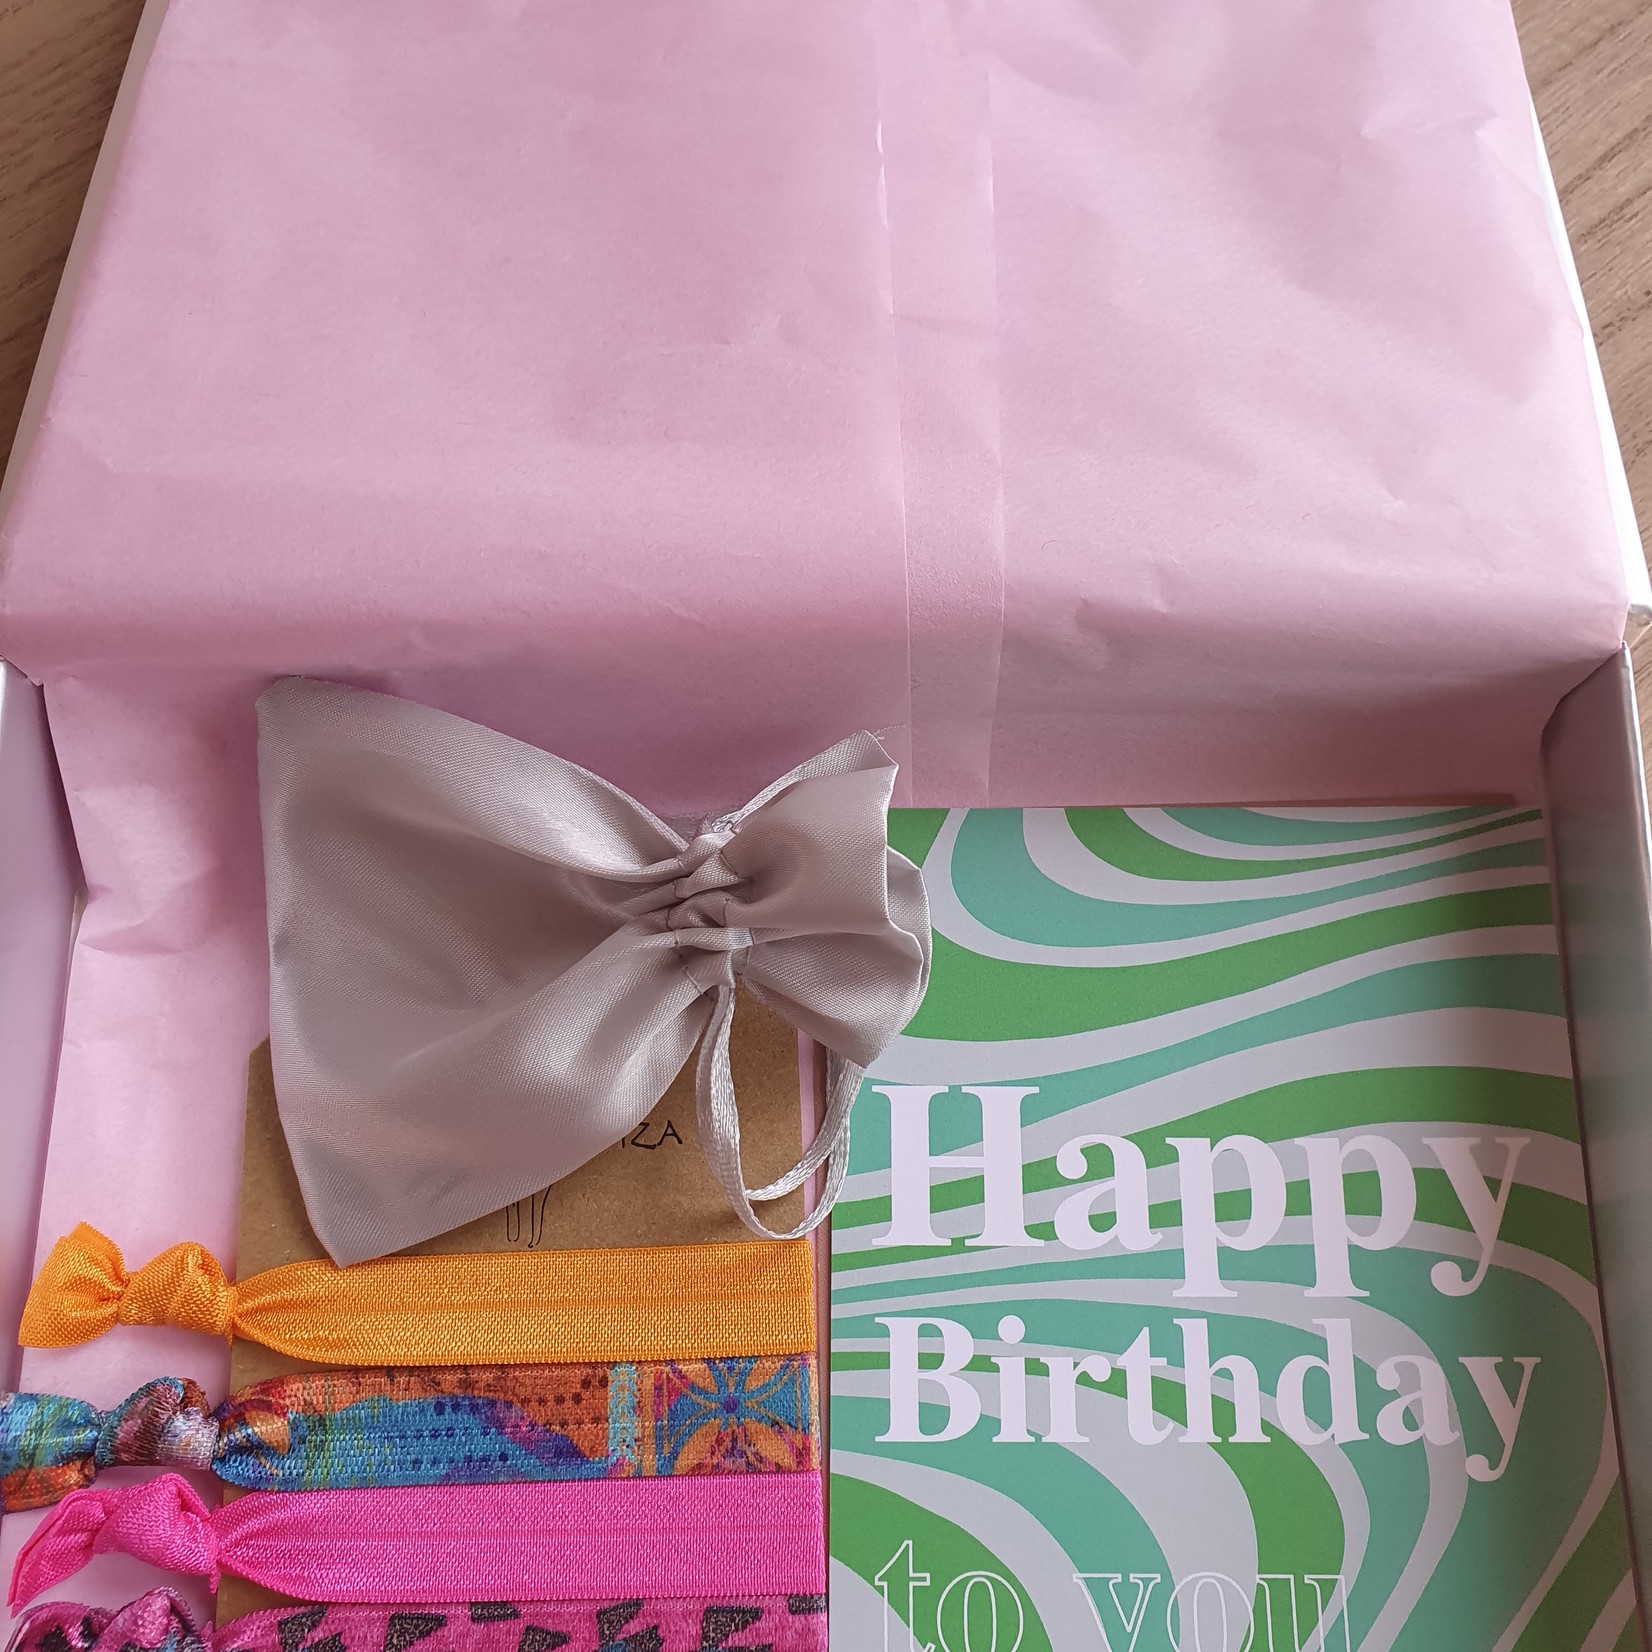 Eve's Gifts Silver gift box - Happy Birthday